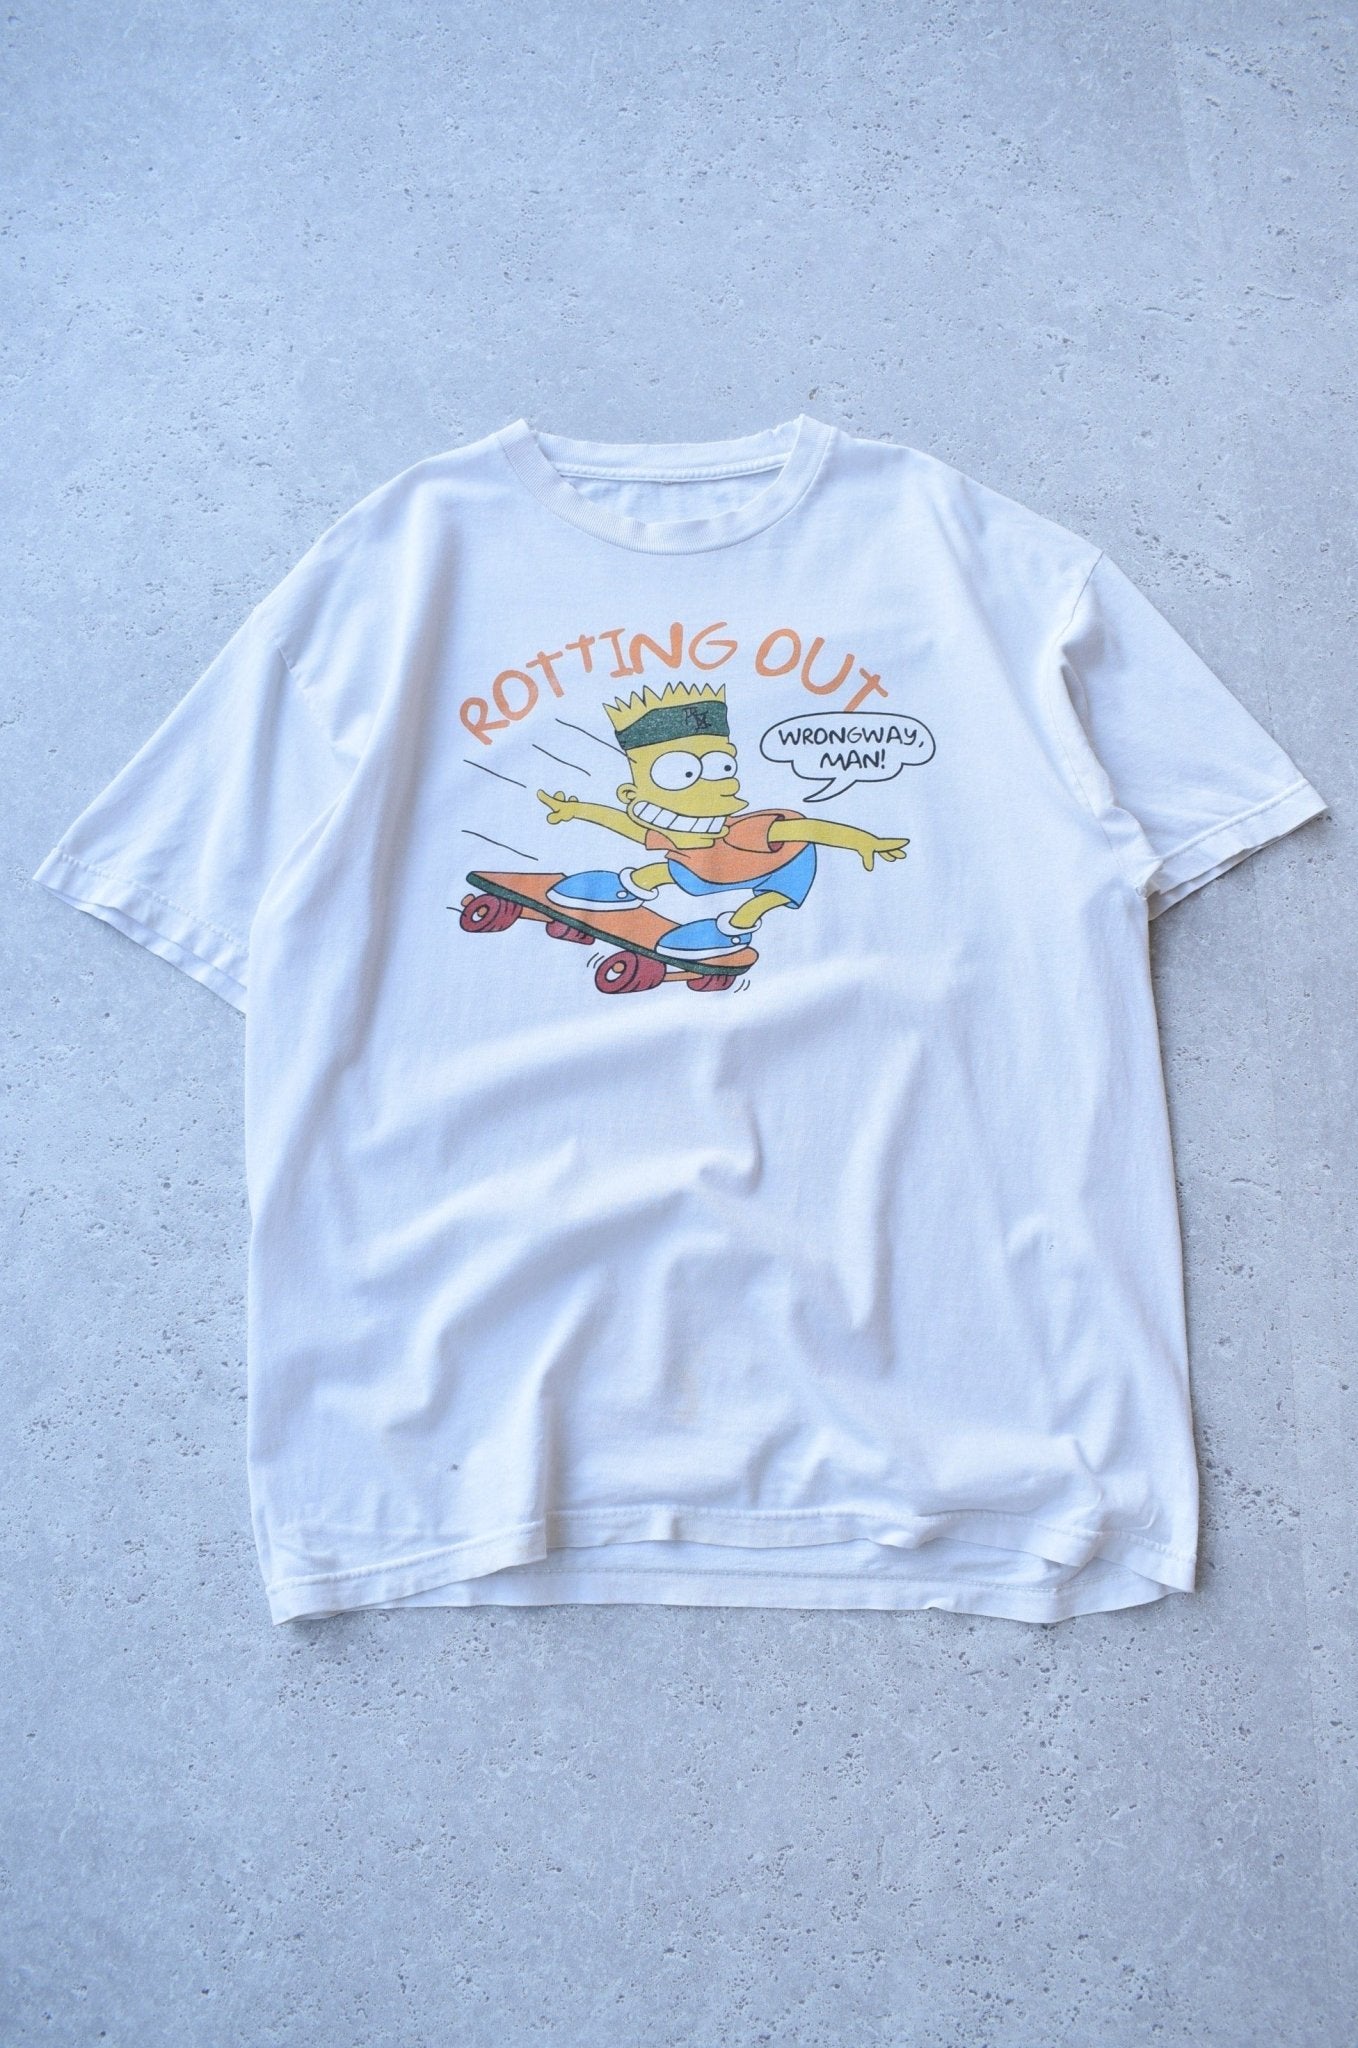 Vintage The Simpsons x Rotting Out Tee (XL) - Retrospective Store